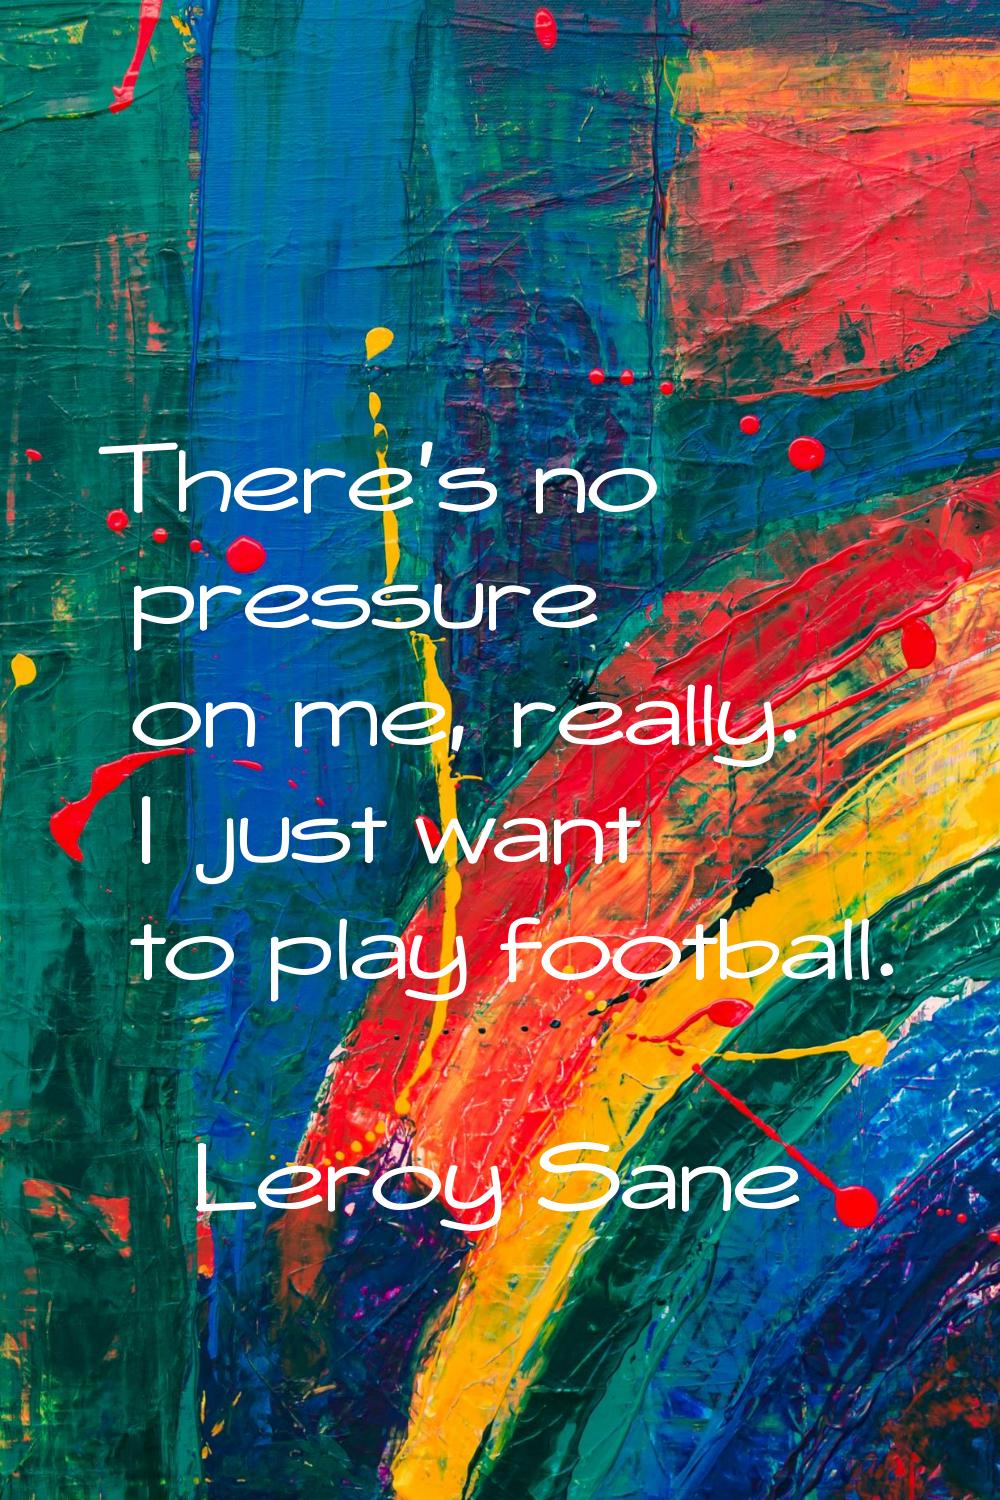 There's no pressure on me, really. I just want to play football.